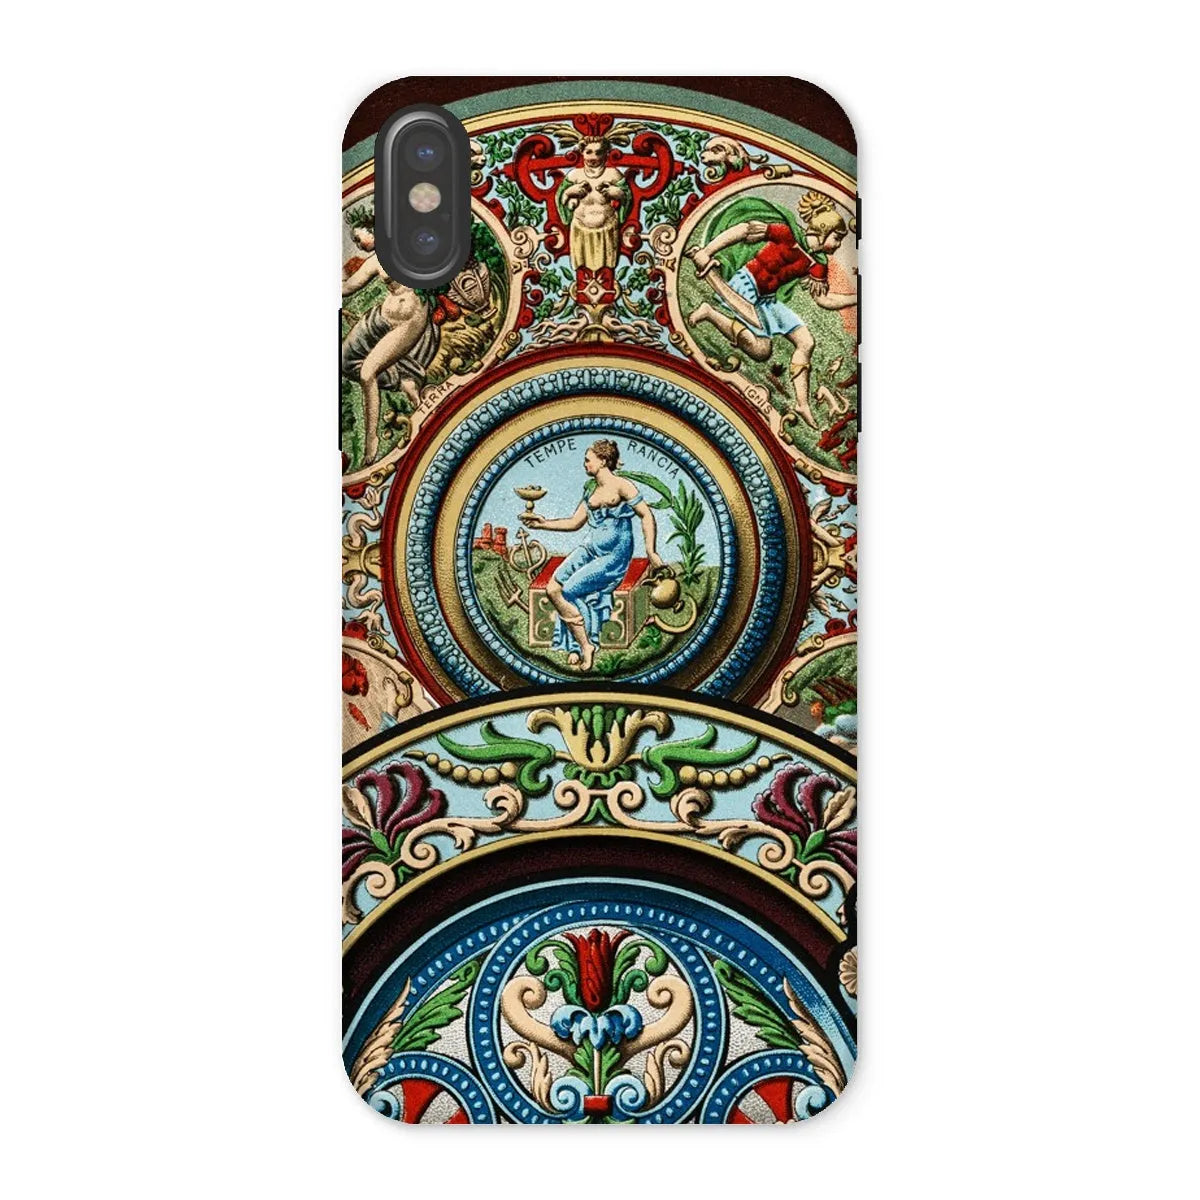 Another Renaissance Aesthetic Phone Case - Auguste Racinet - Iphone x / Matte - Mobile Phone Cases - Aesthetic Art